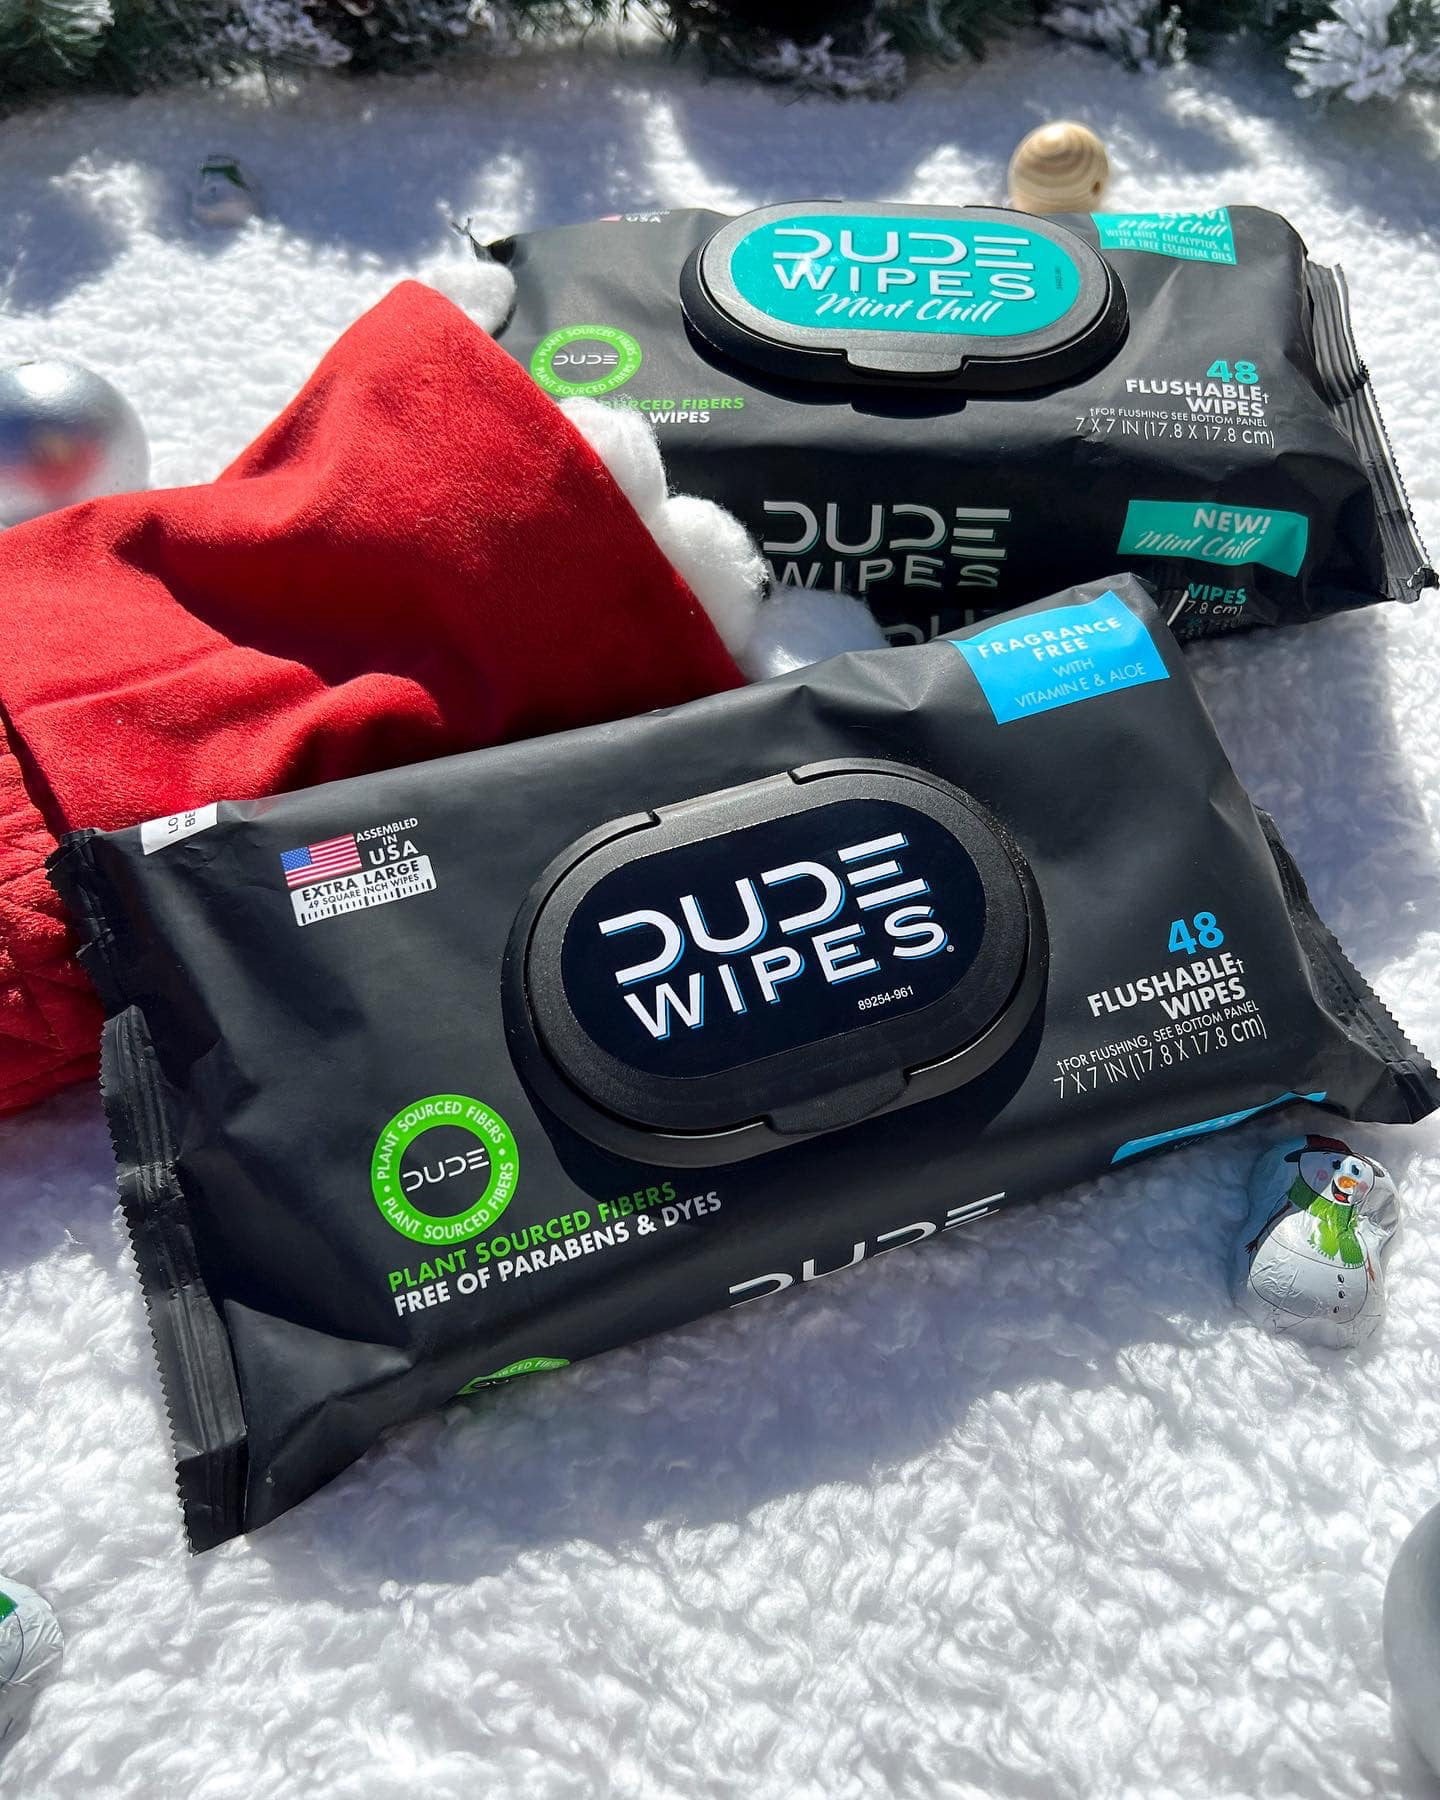 Dude Wipes Products